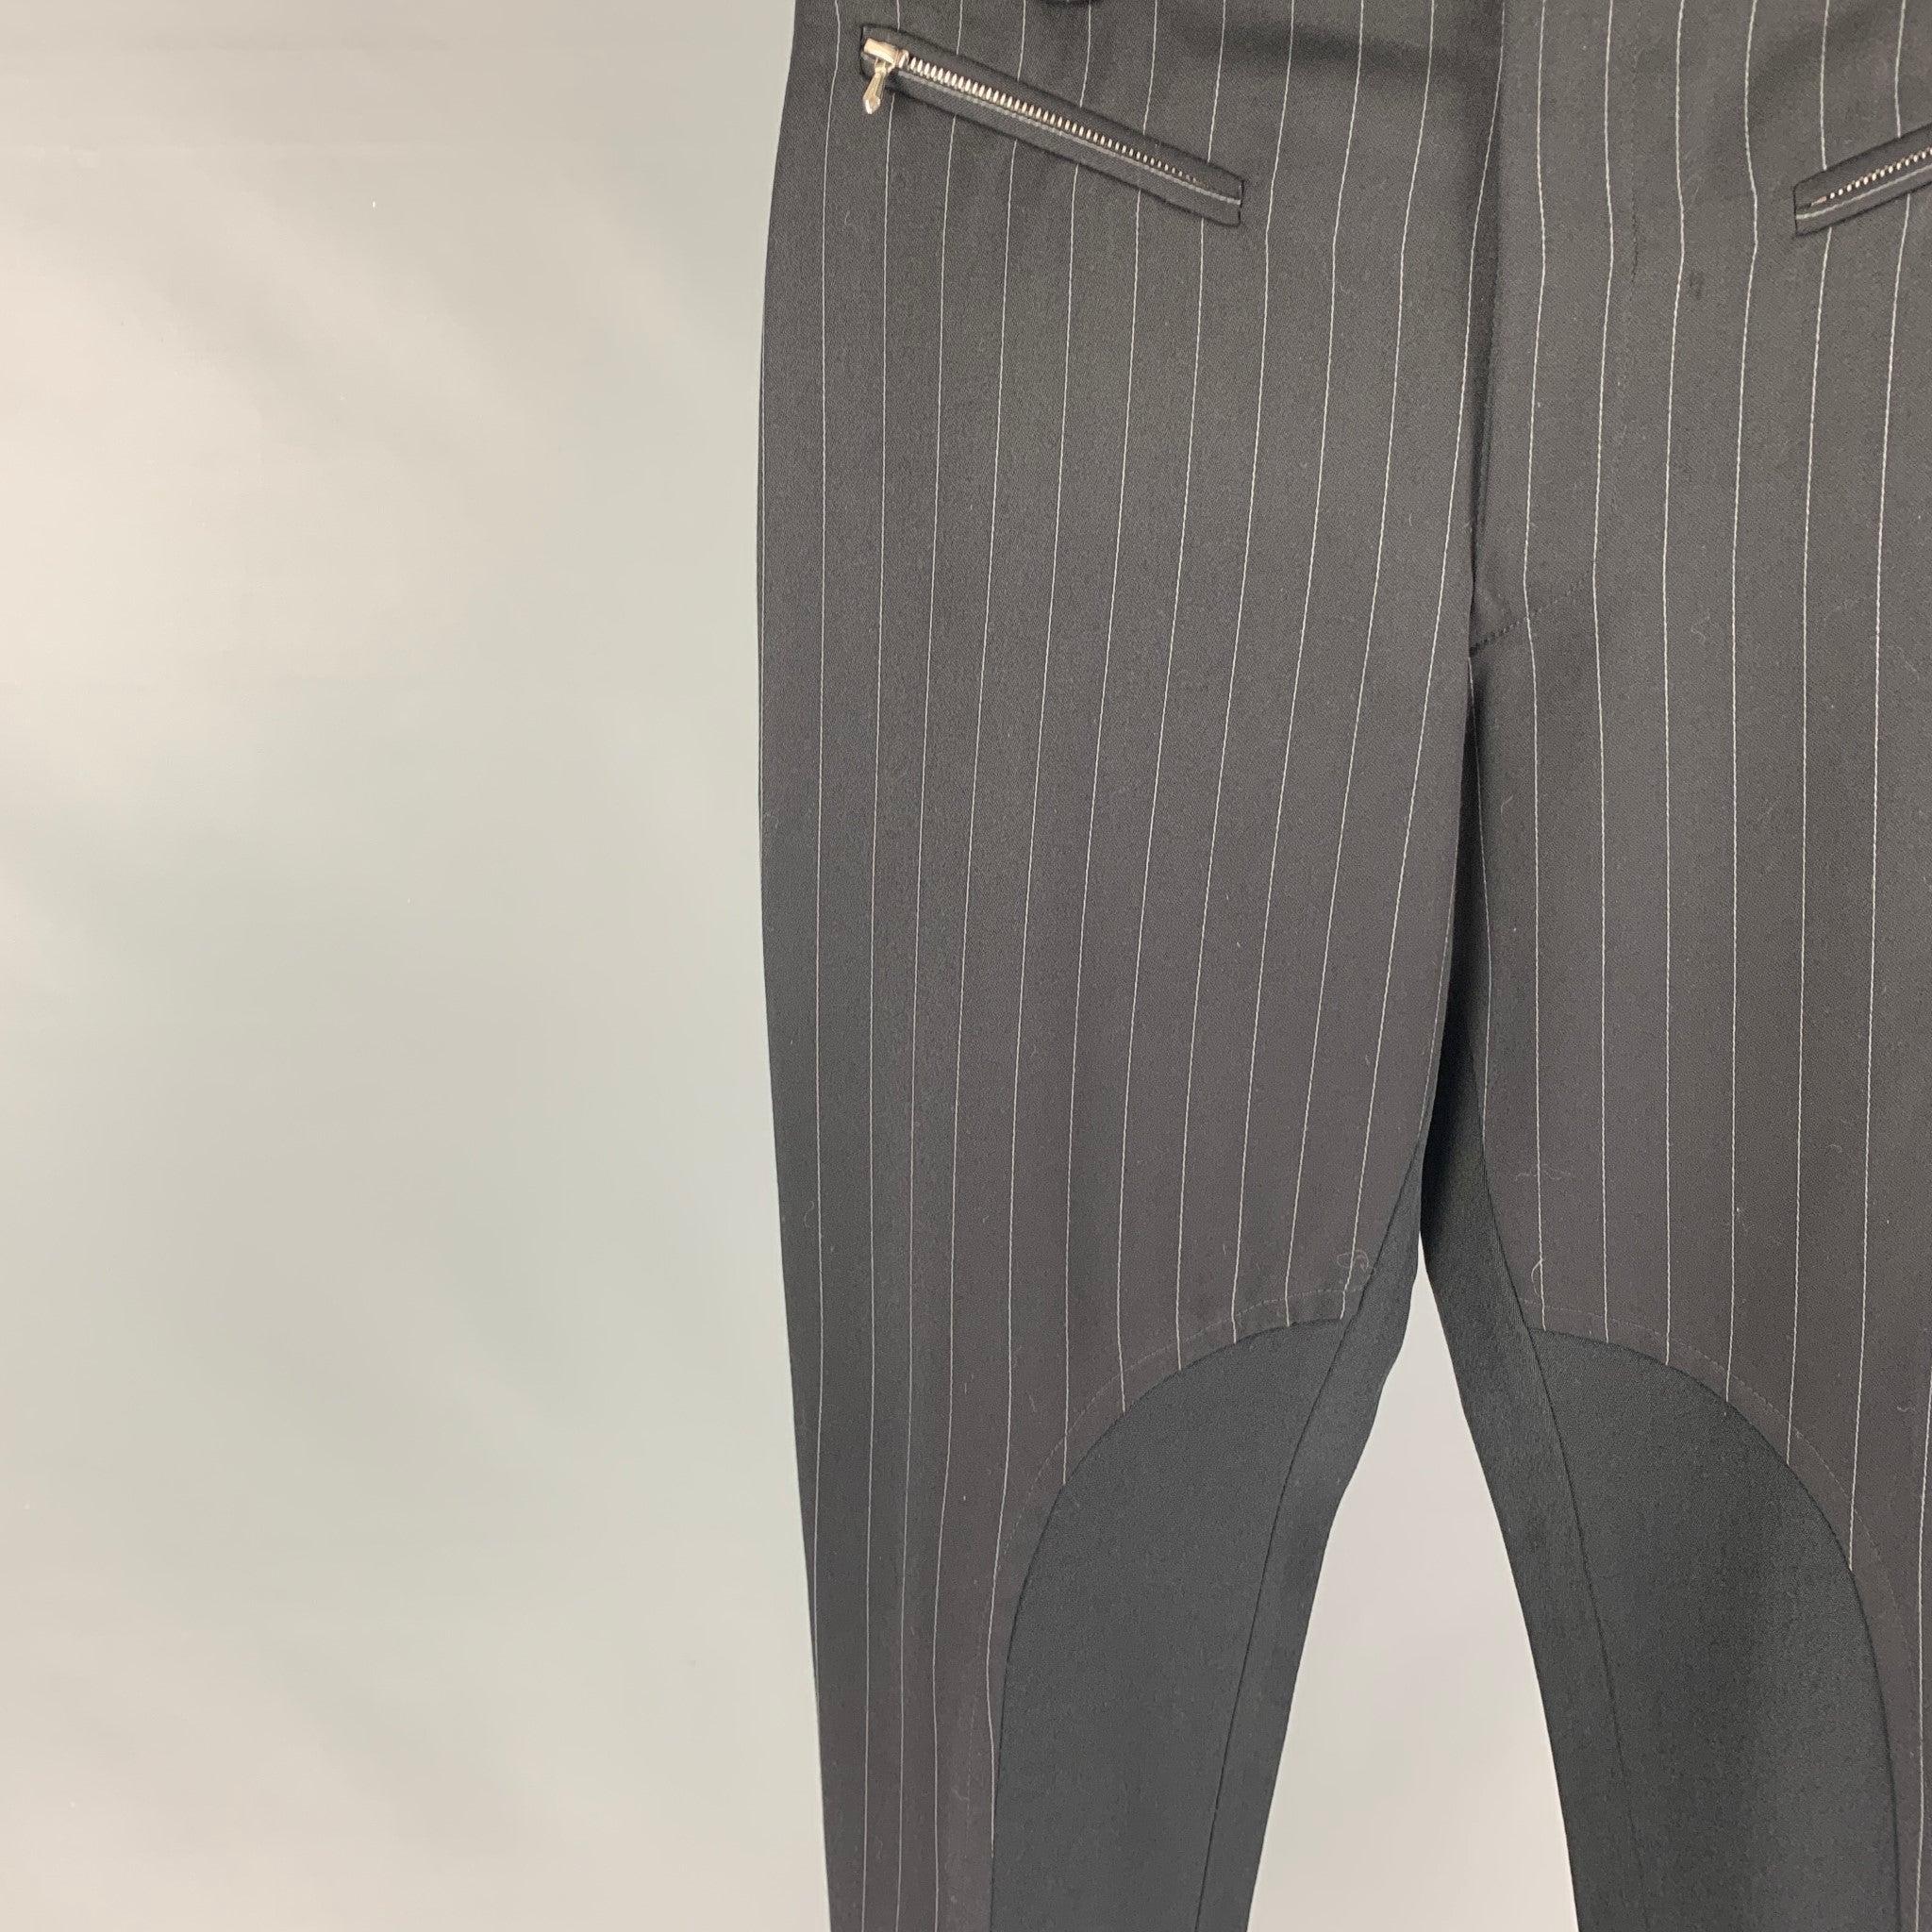 JOHN RICHMOND dress pants comes in a black stripe nylon blend featuring a skinny fit, inseam panel, zipper pockets, and a zip fly closure. Made in England.
Excellent
Pre-Owned Condition. 

Marked:   M  

Measurements: 
  Waist: 31 inches Rise: 12